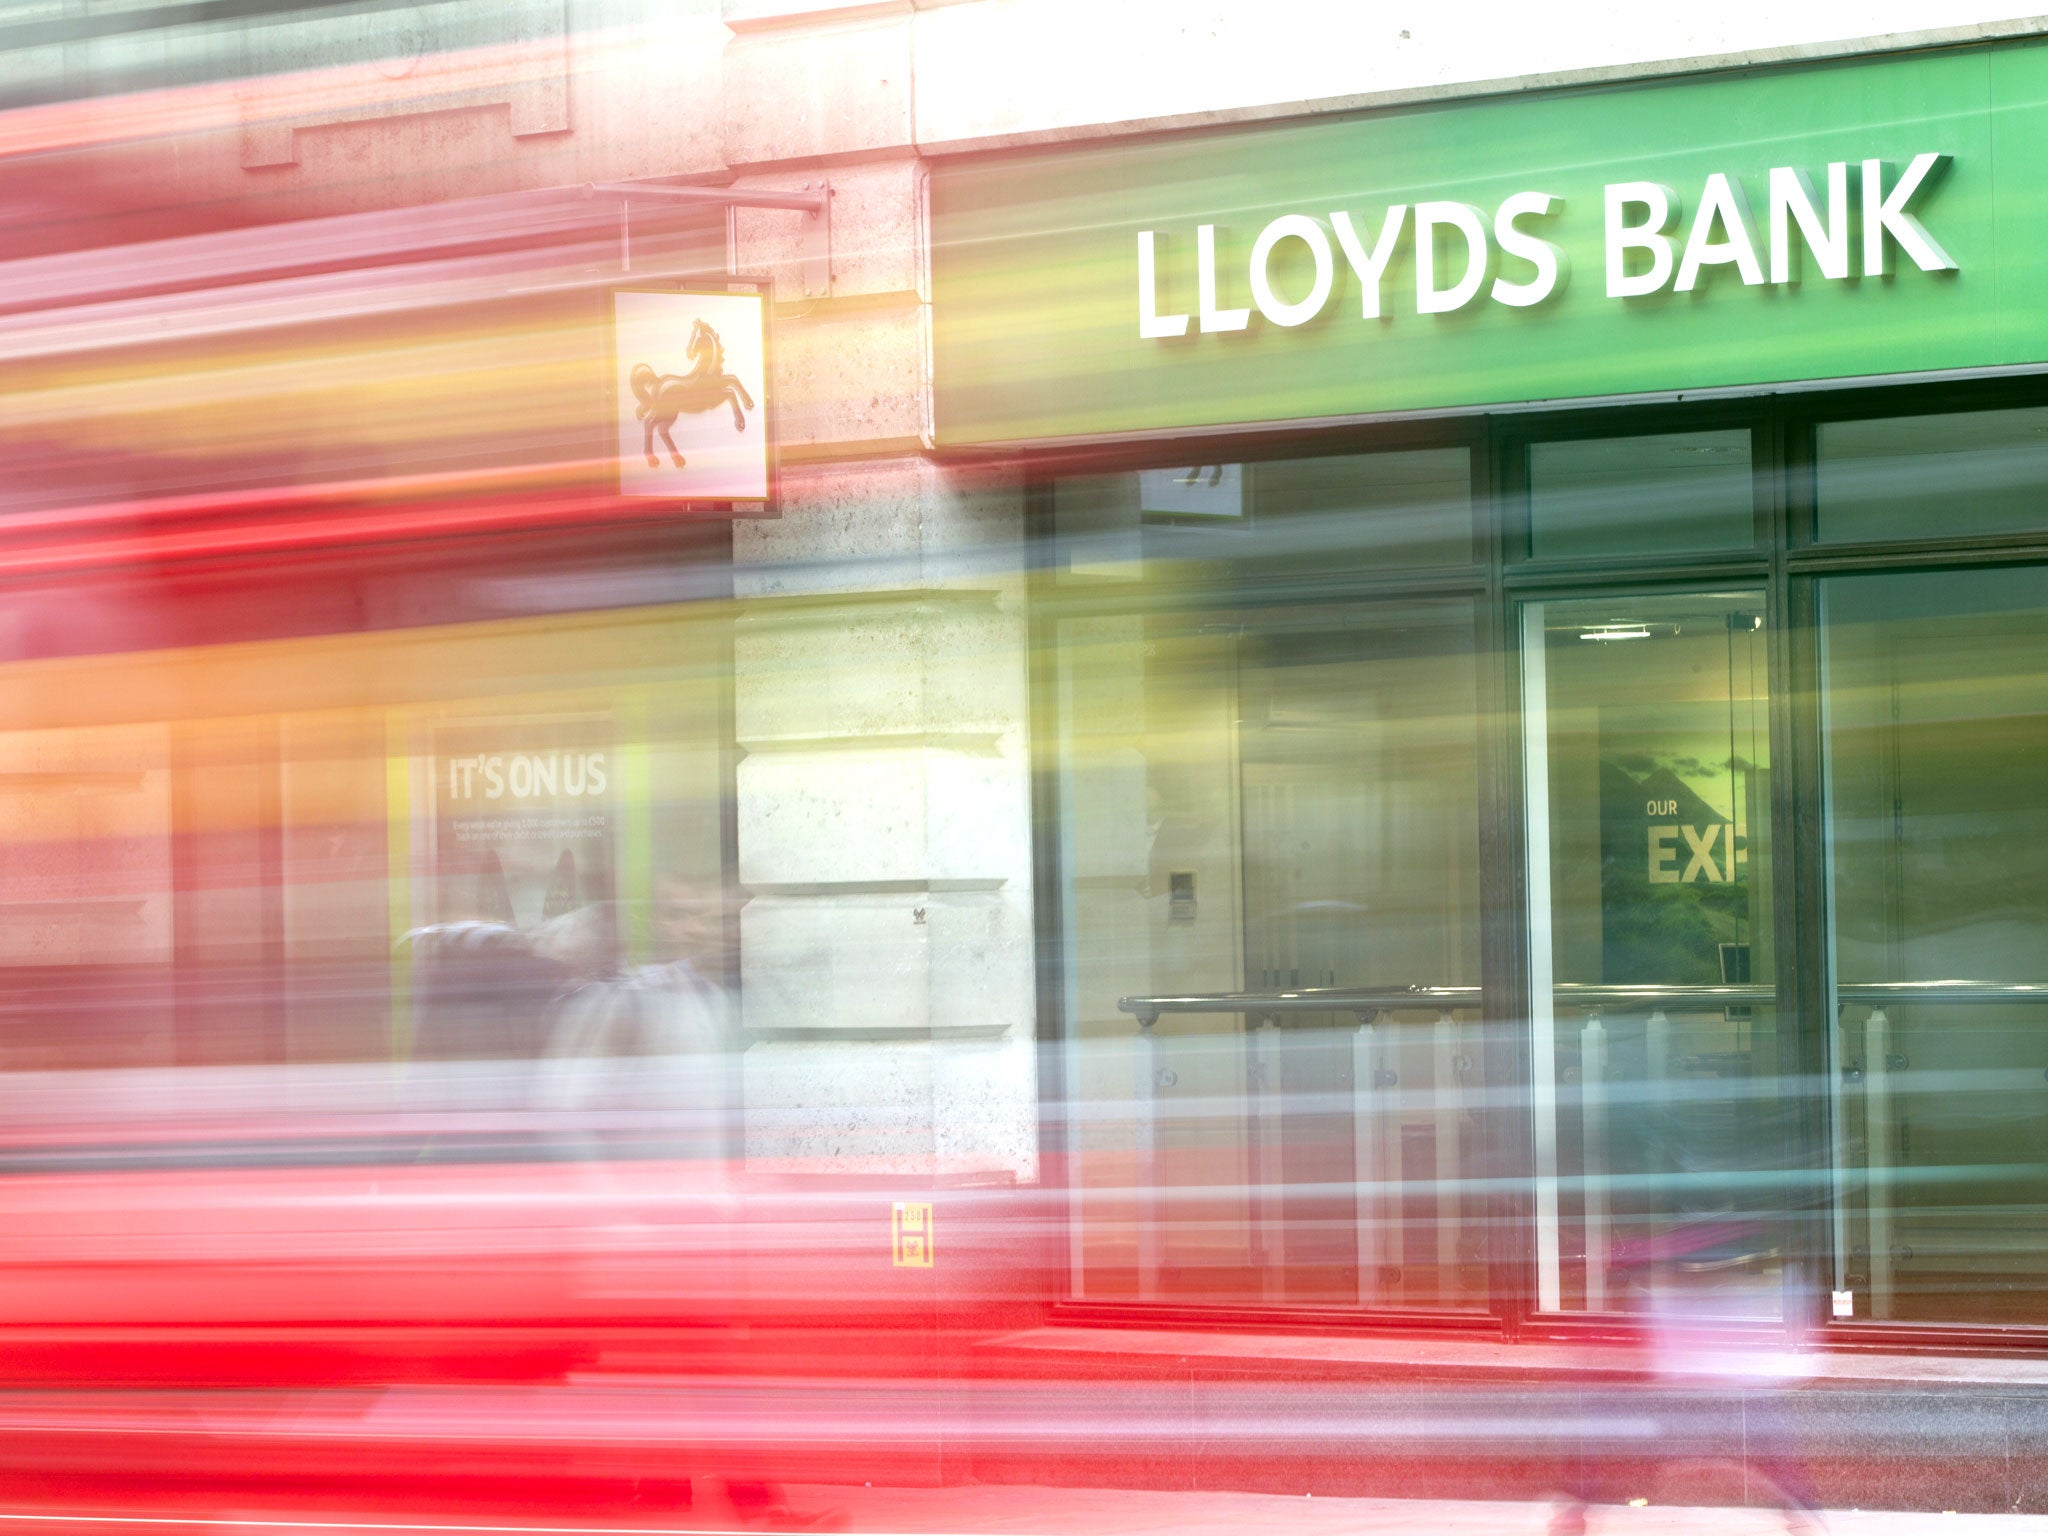 Lloyds seems to be the worst for dealing fairly with customers' complaints